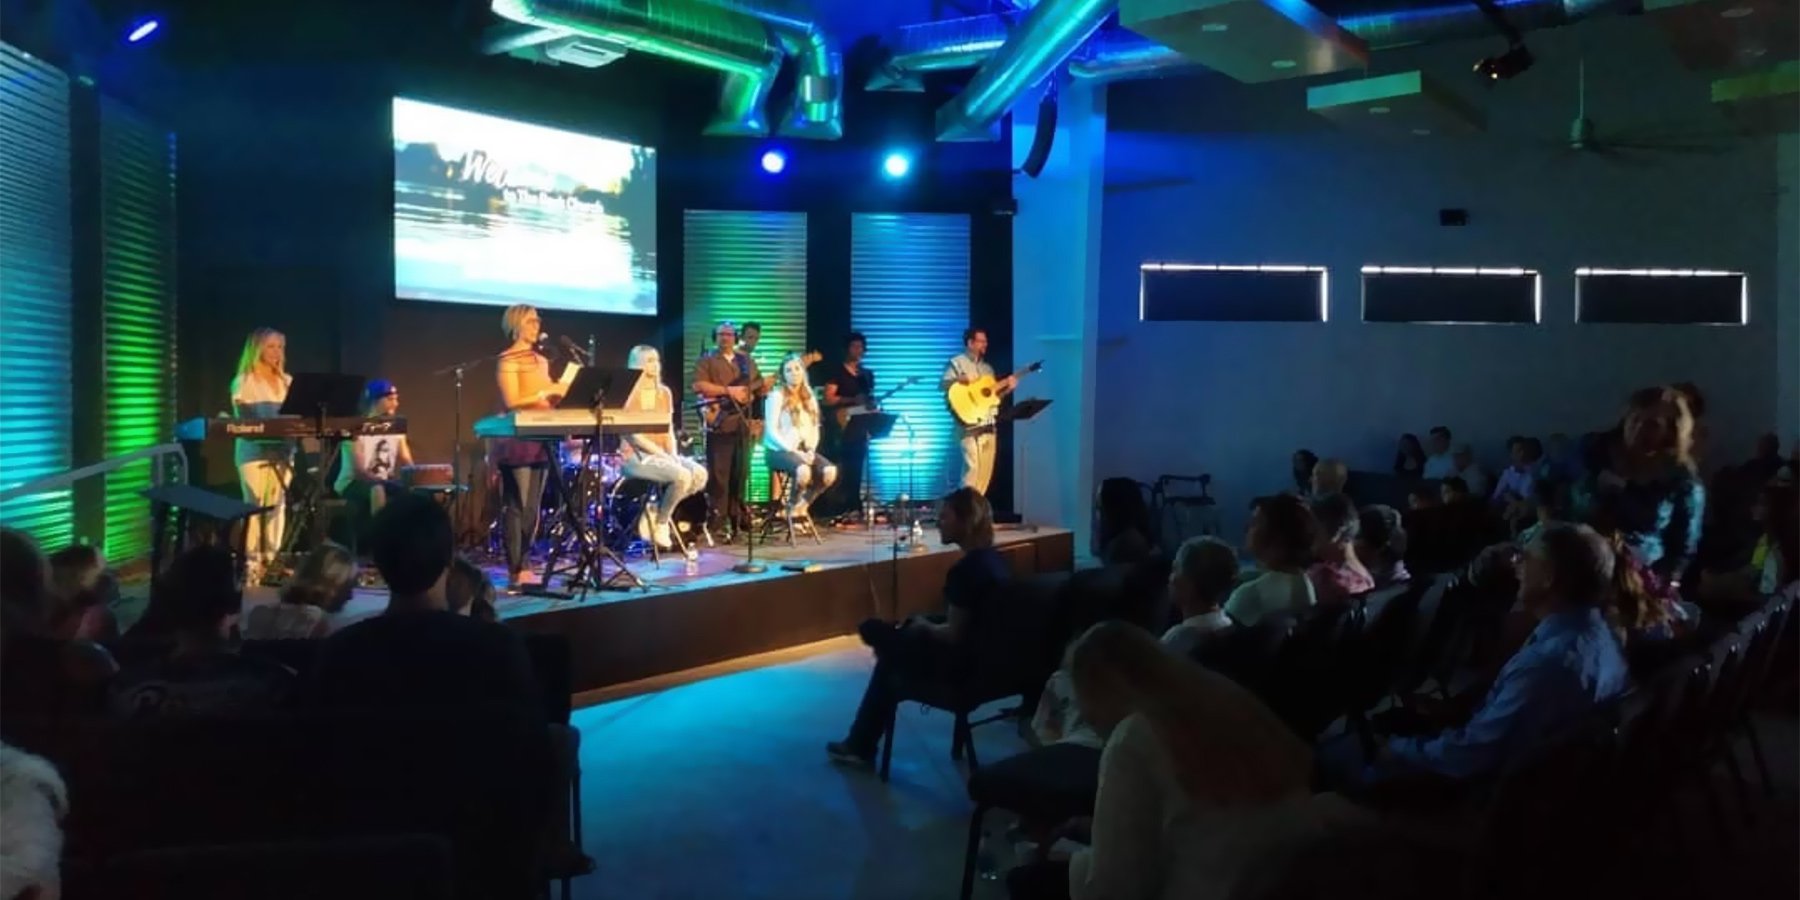  Worship team in front of local non-denominational church 